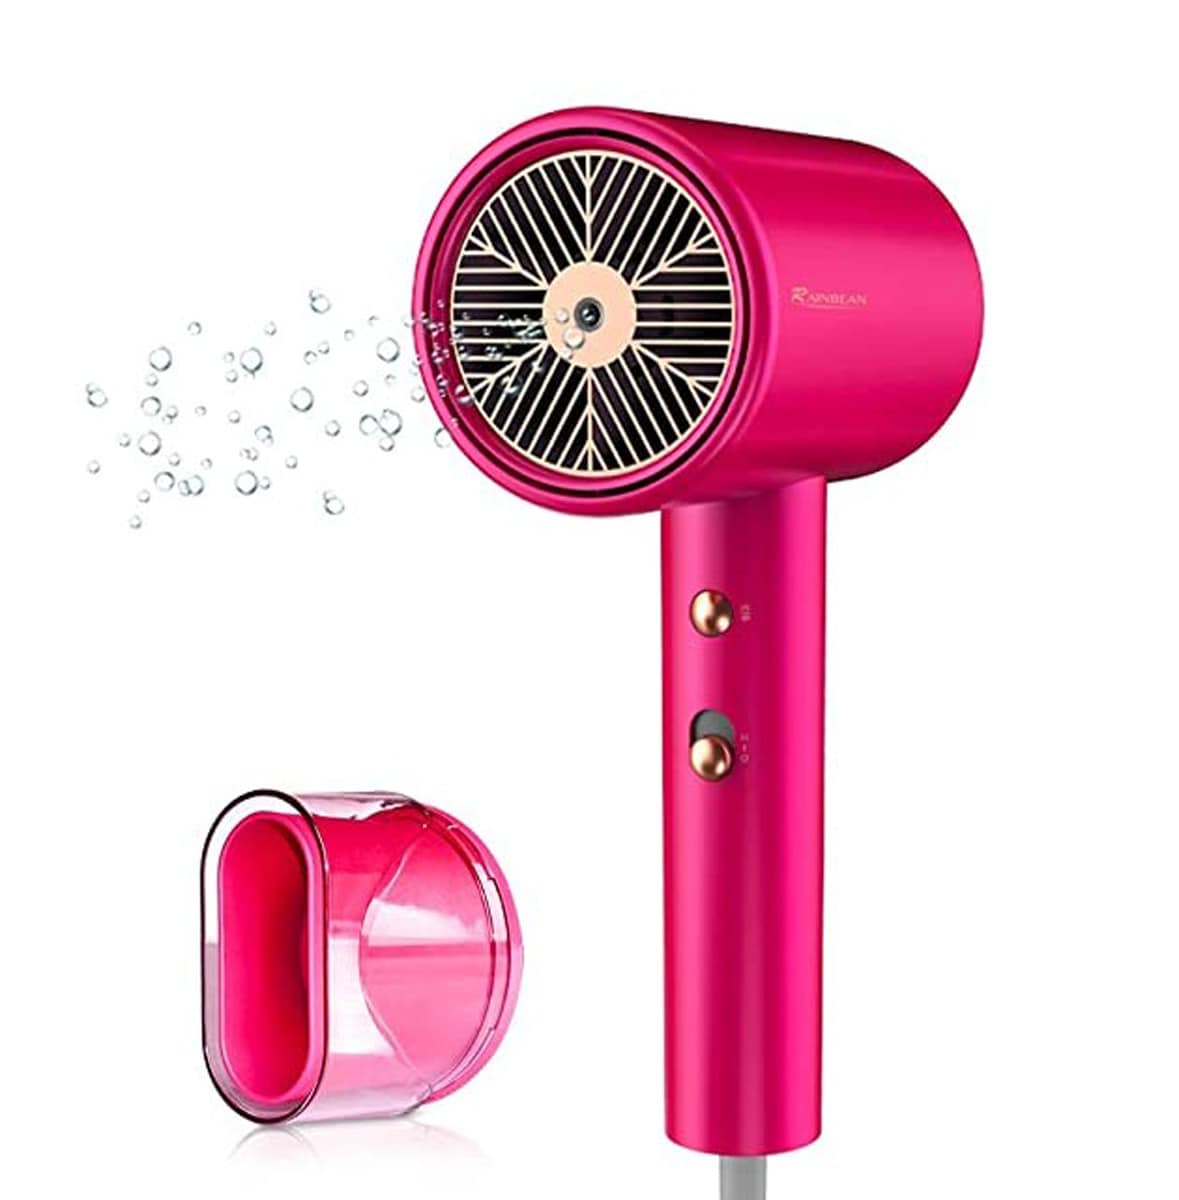 Hair dryer Personal Care & Accessories at 